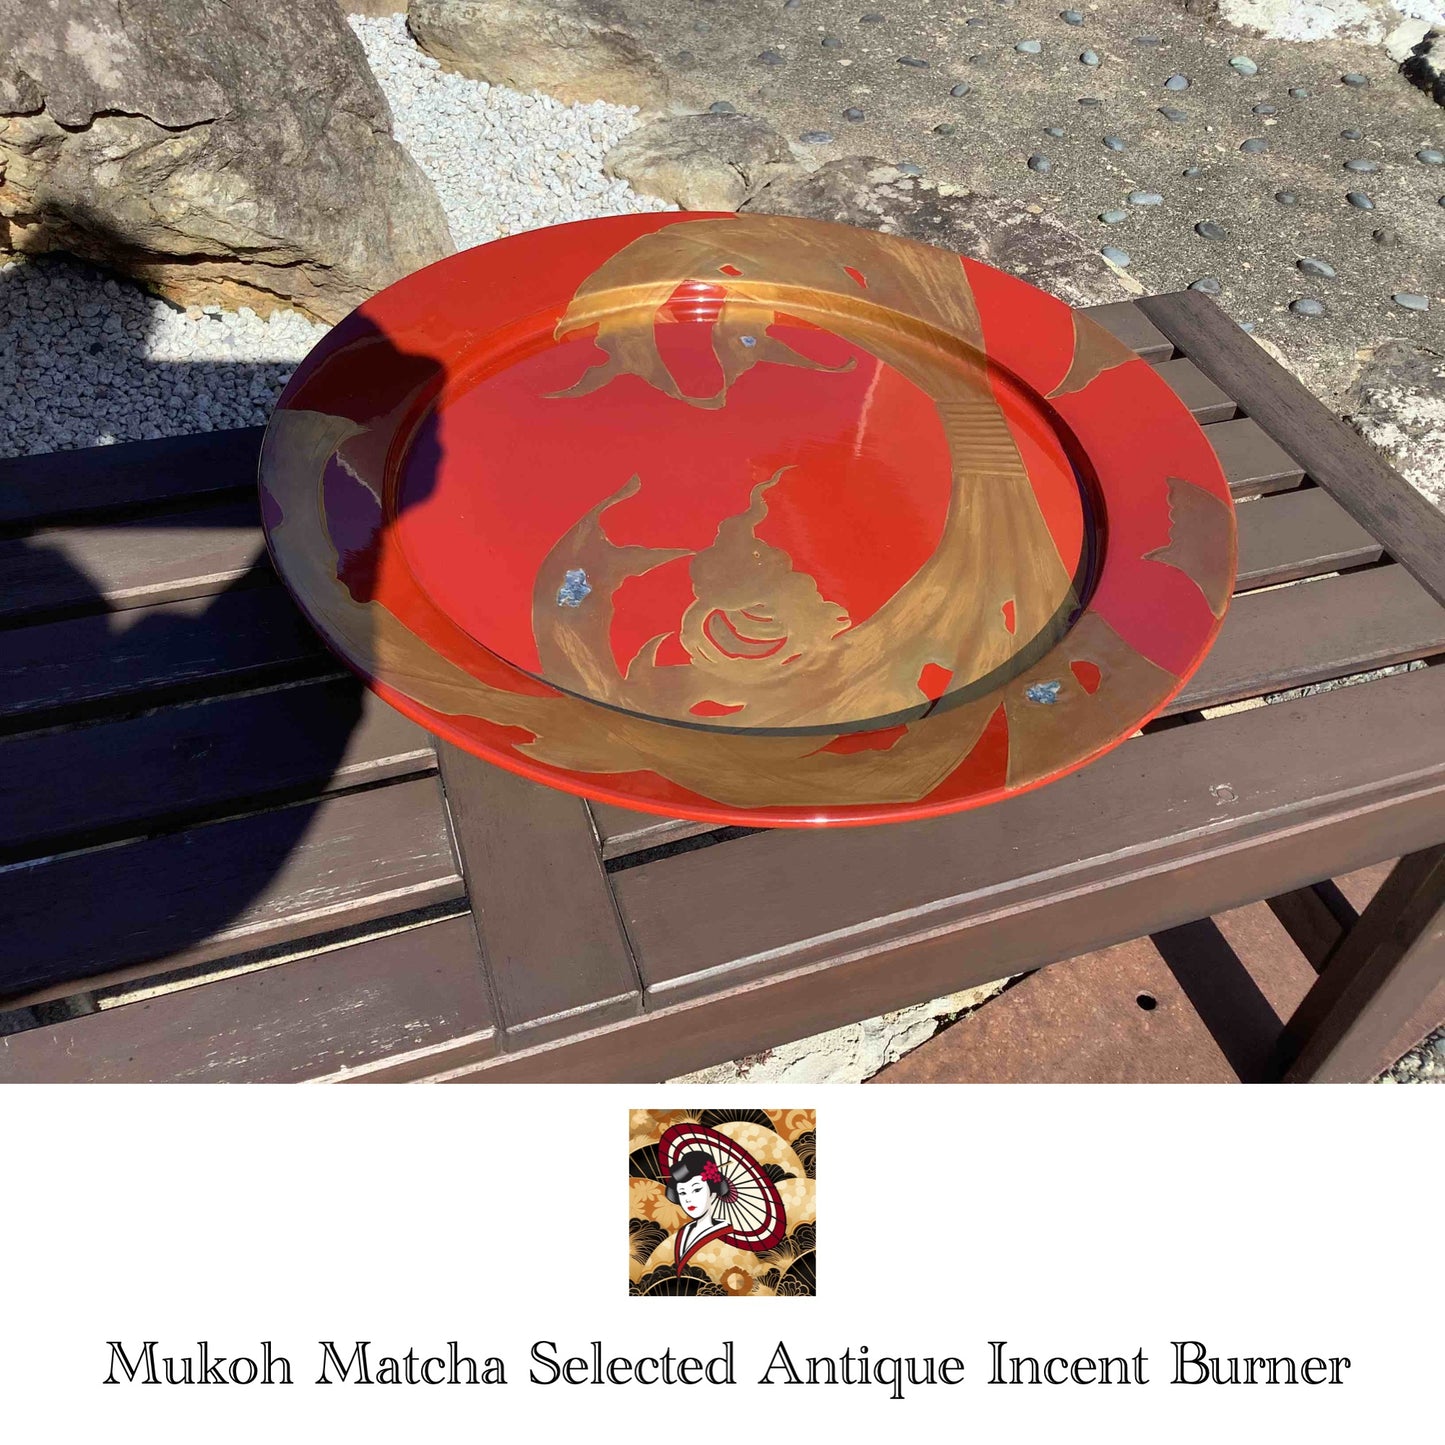 [Antique] Lacquerware Red Gold pattern Large Plate Japanese vintage - Mukoh Matcha Selected